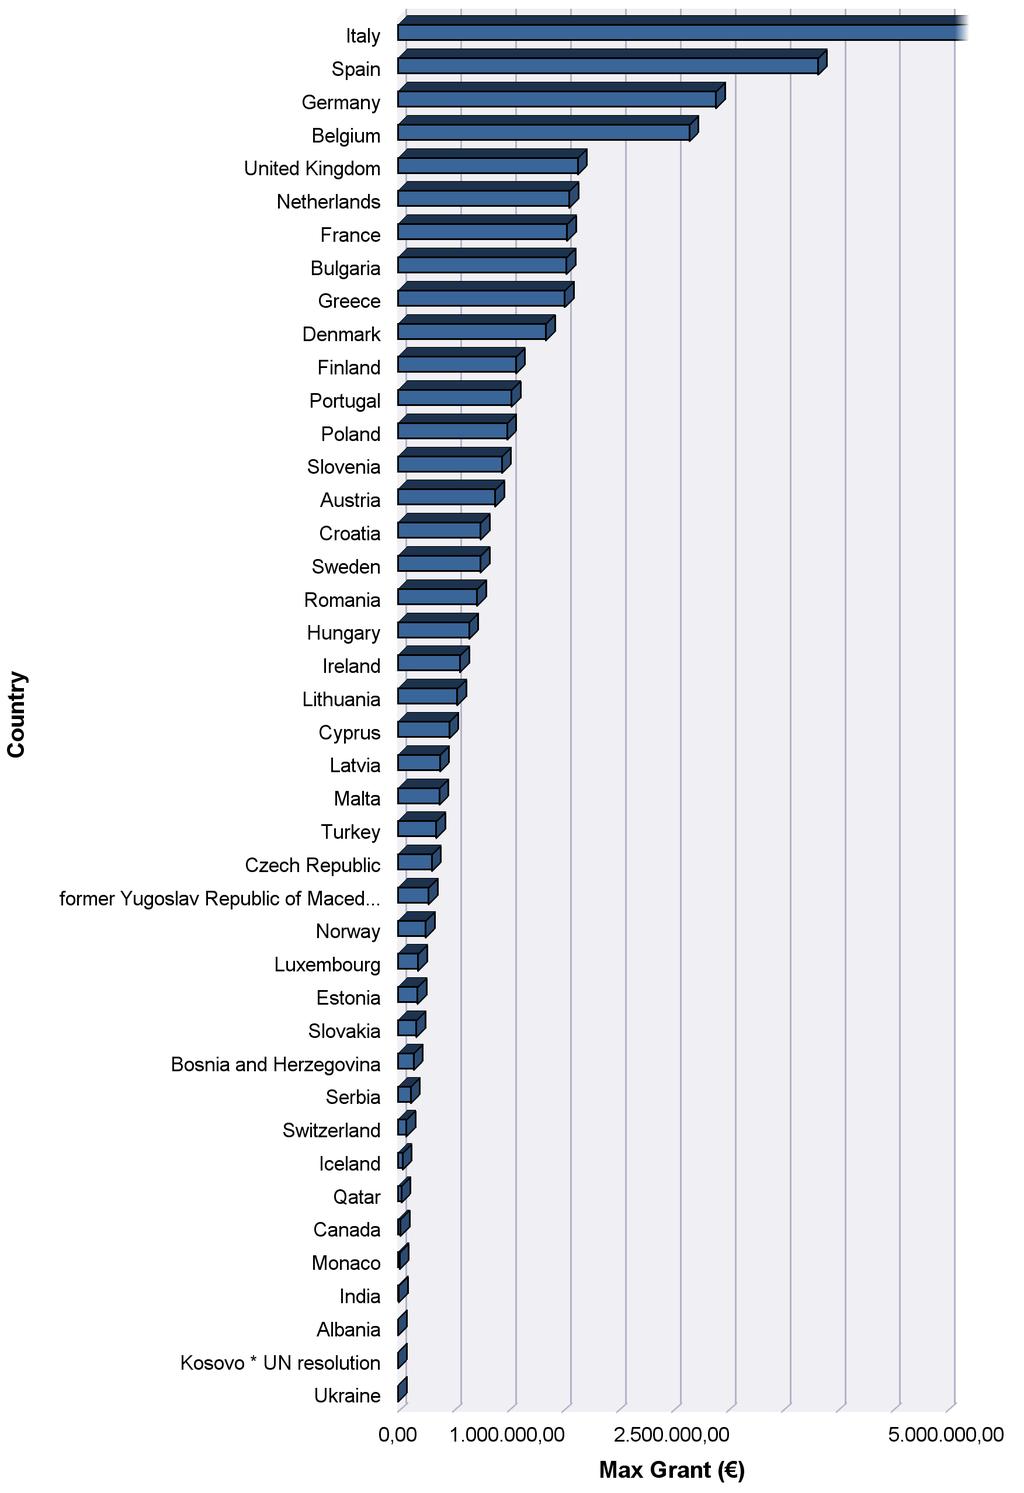 Grant amount awarded per country